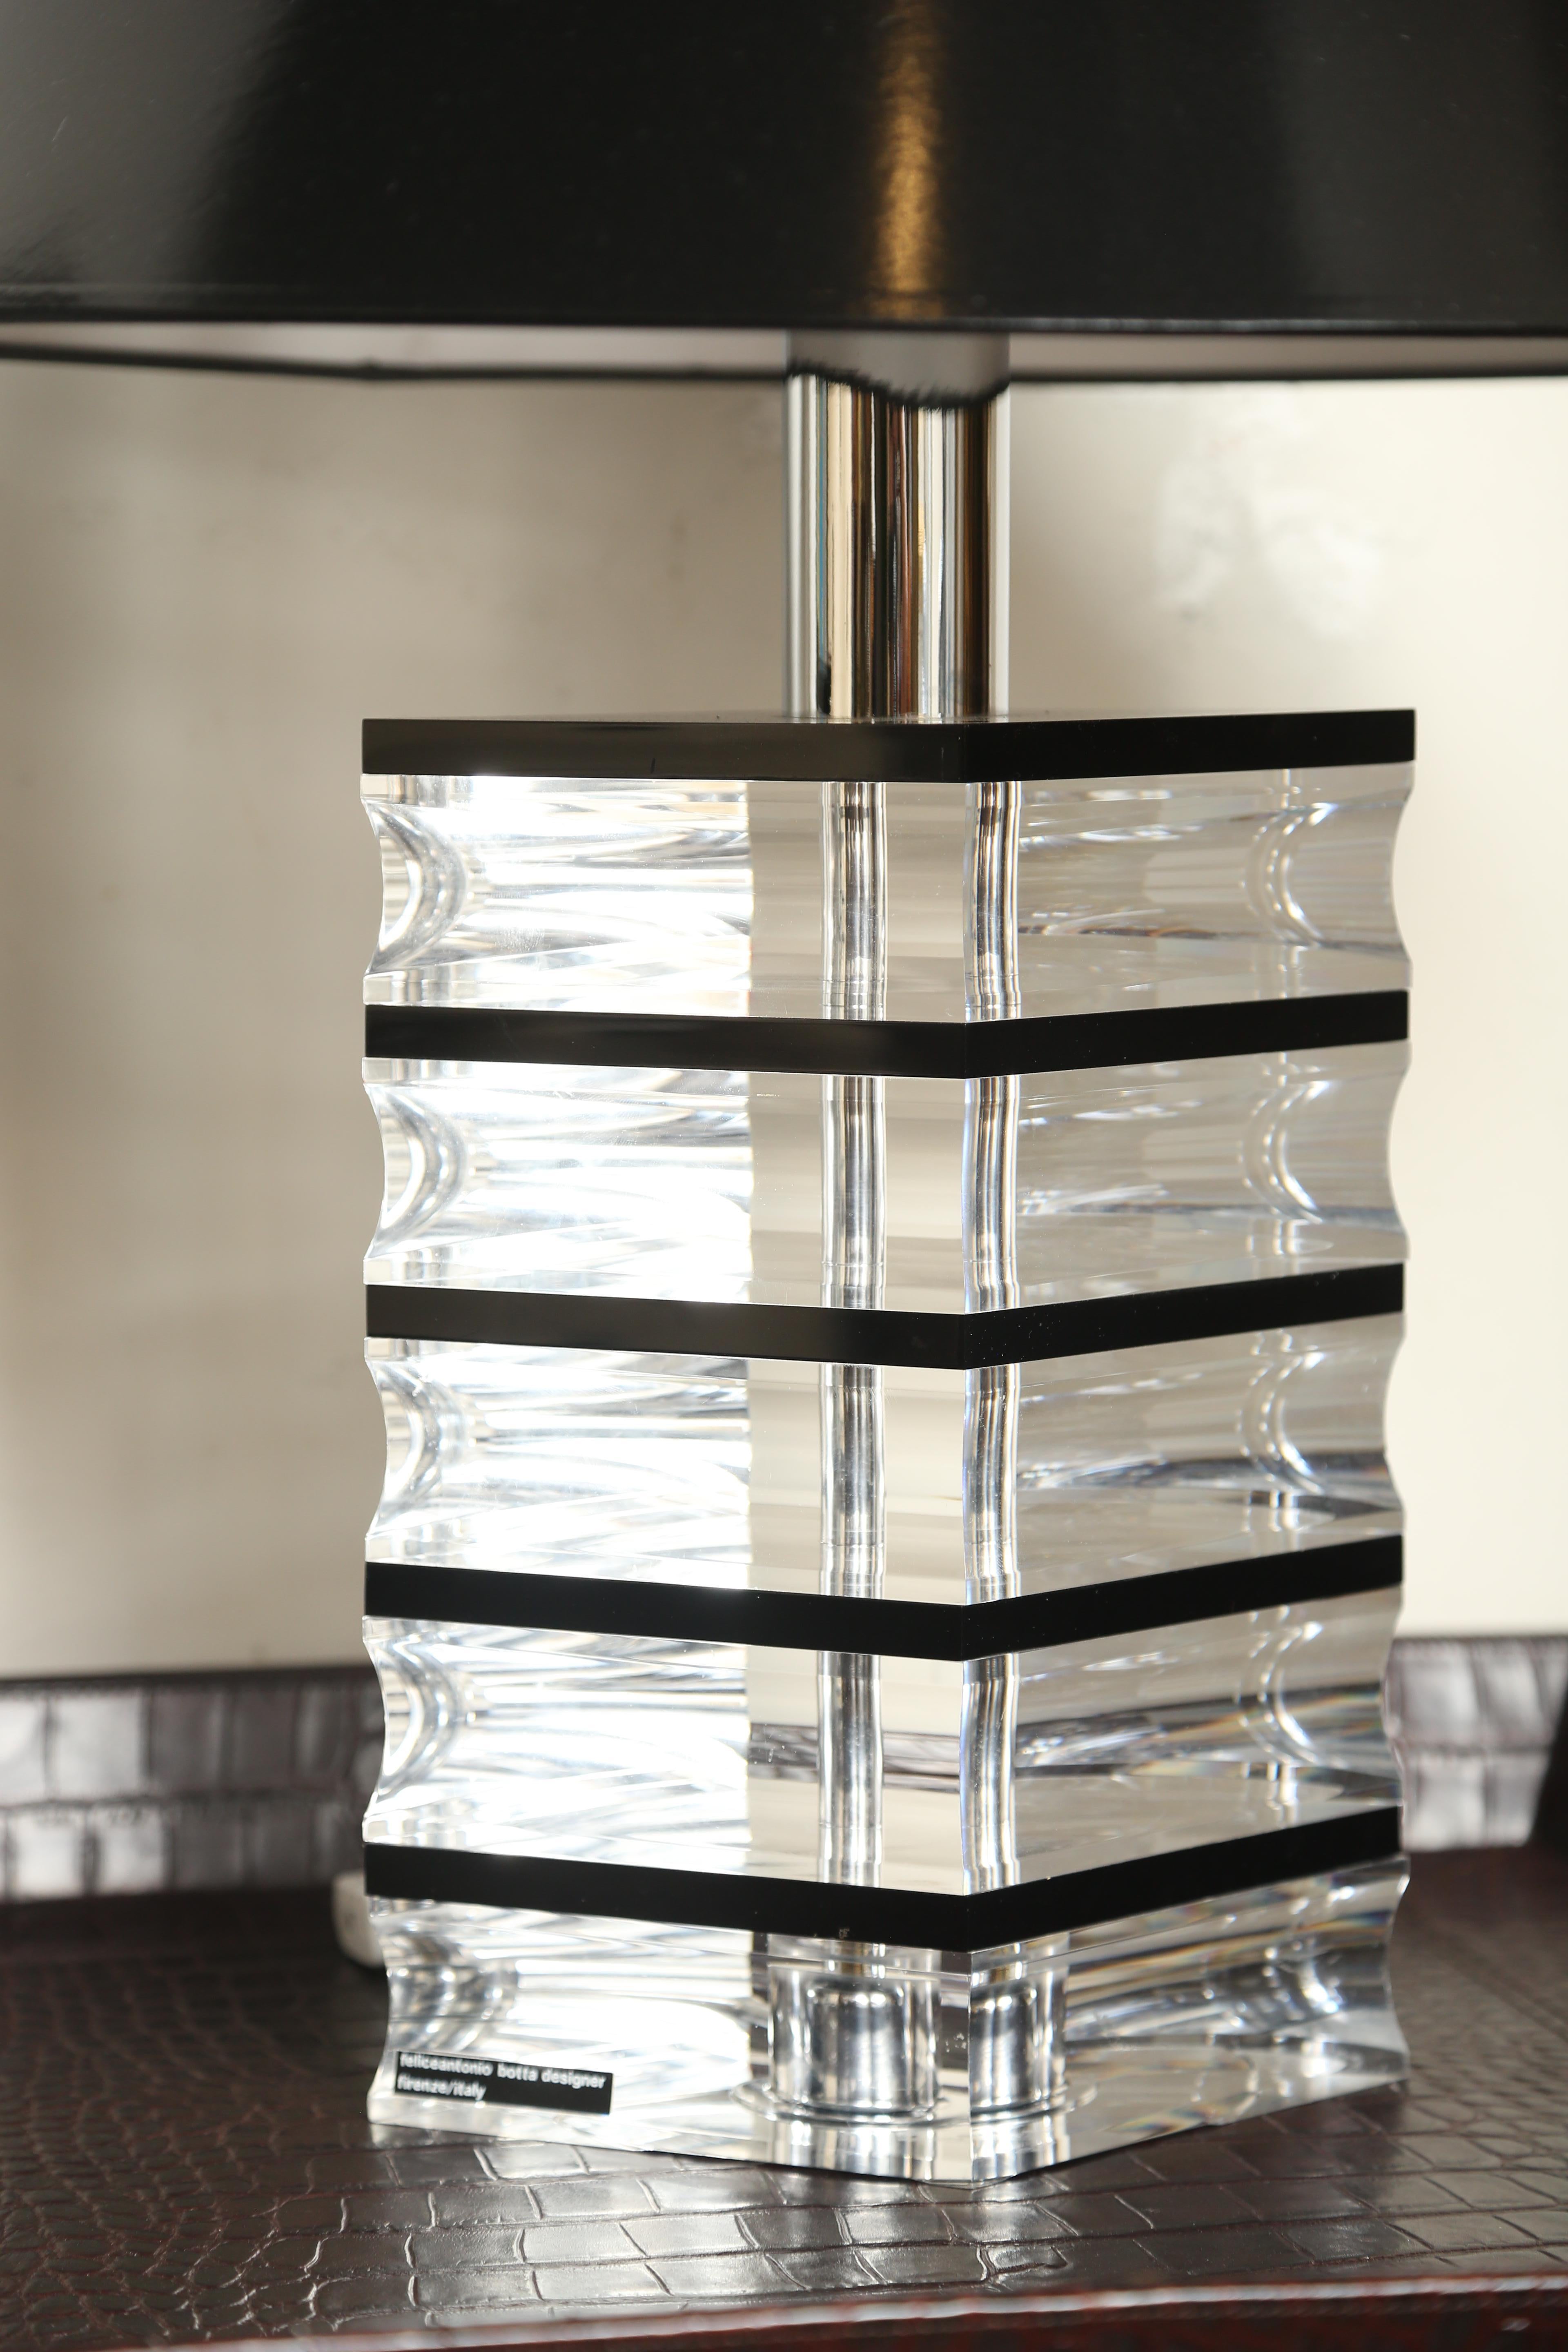 Striking pair of black and clear Lucite lamps by Felice Antonio Botta of Florence, Italy. New black paper shades.